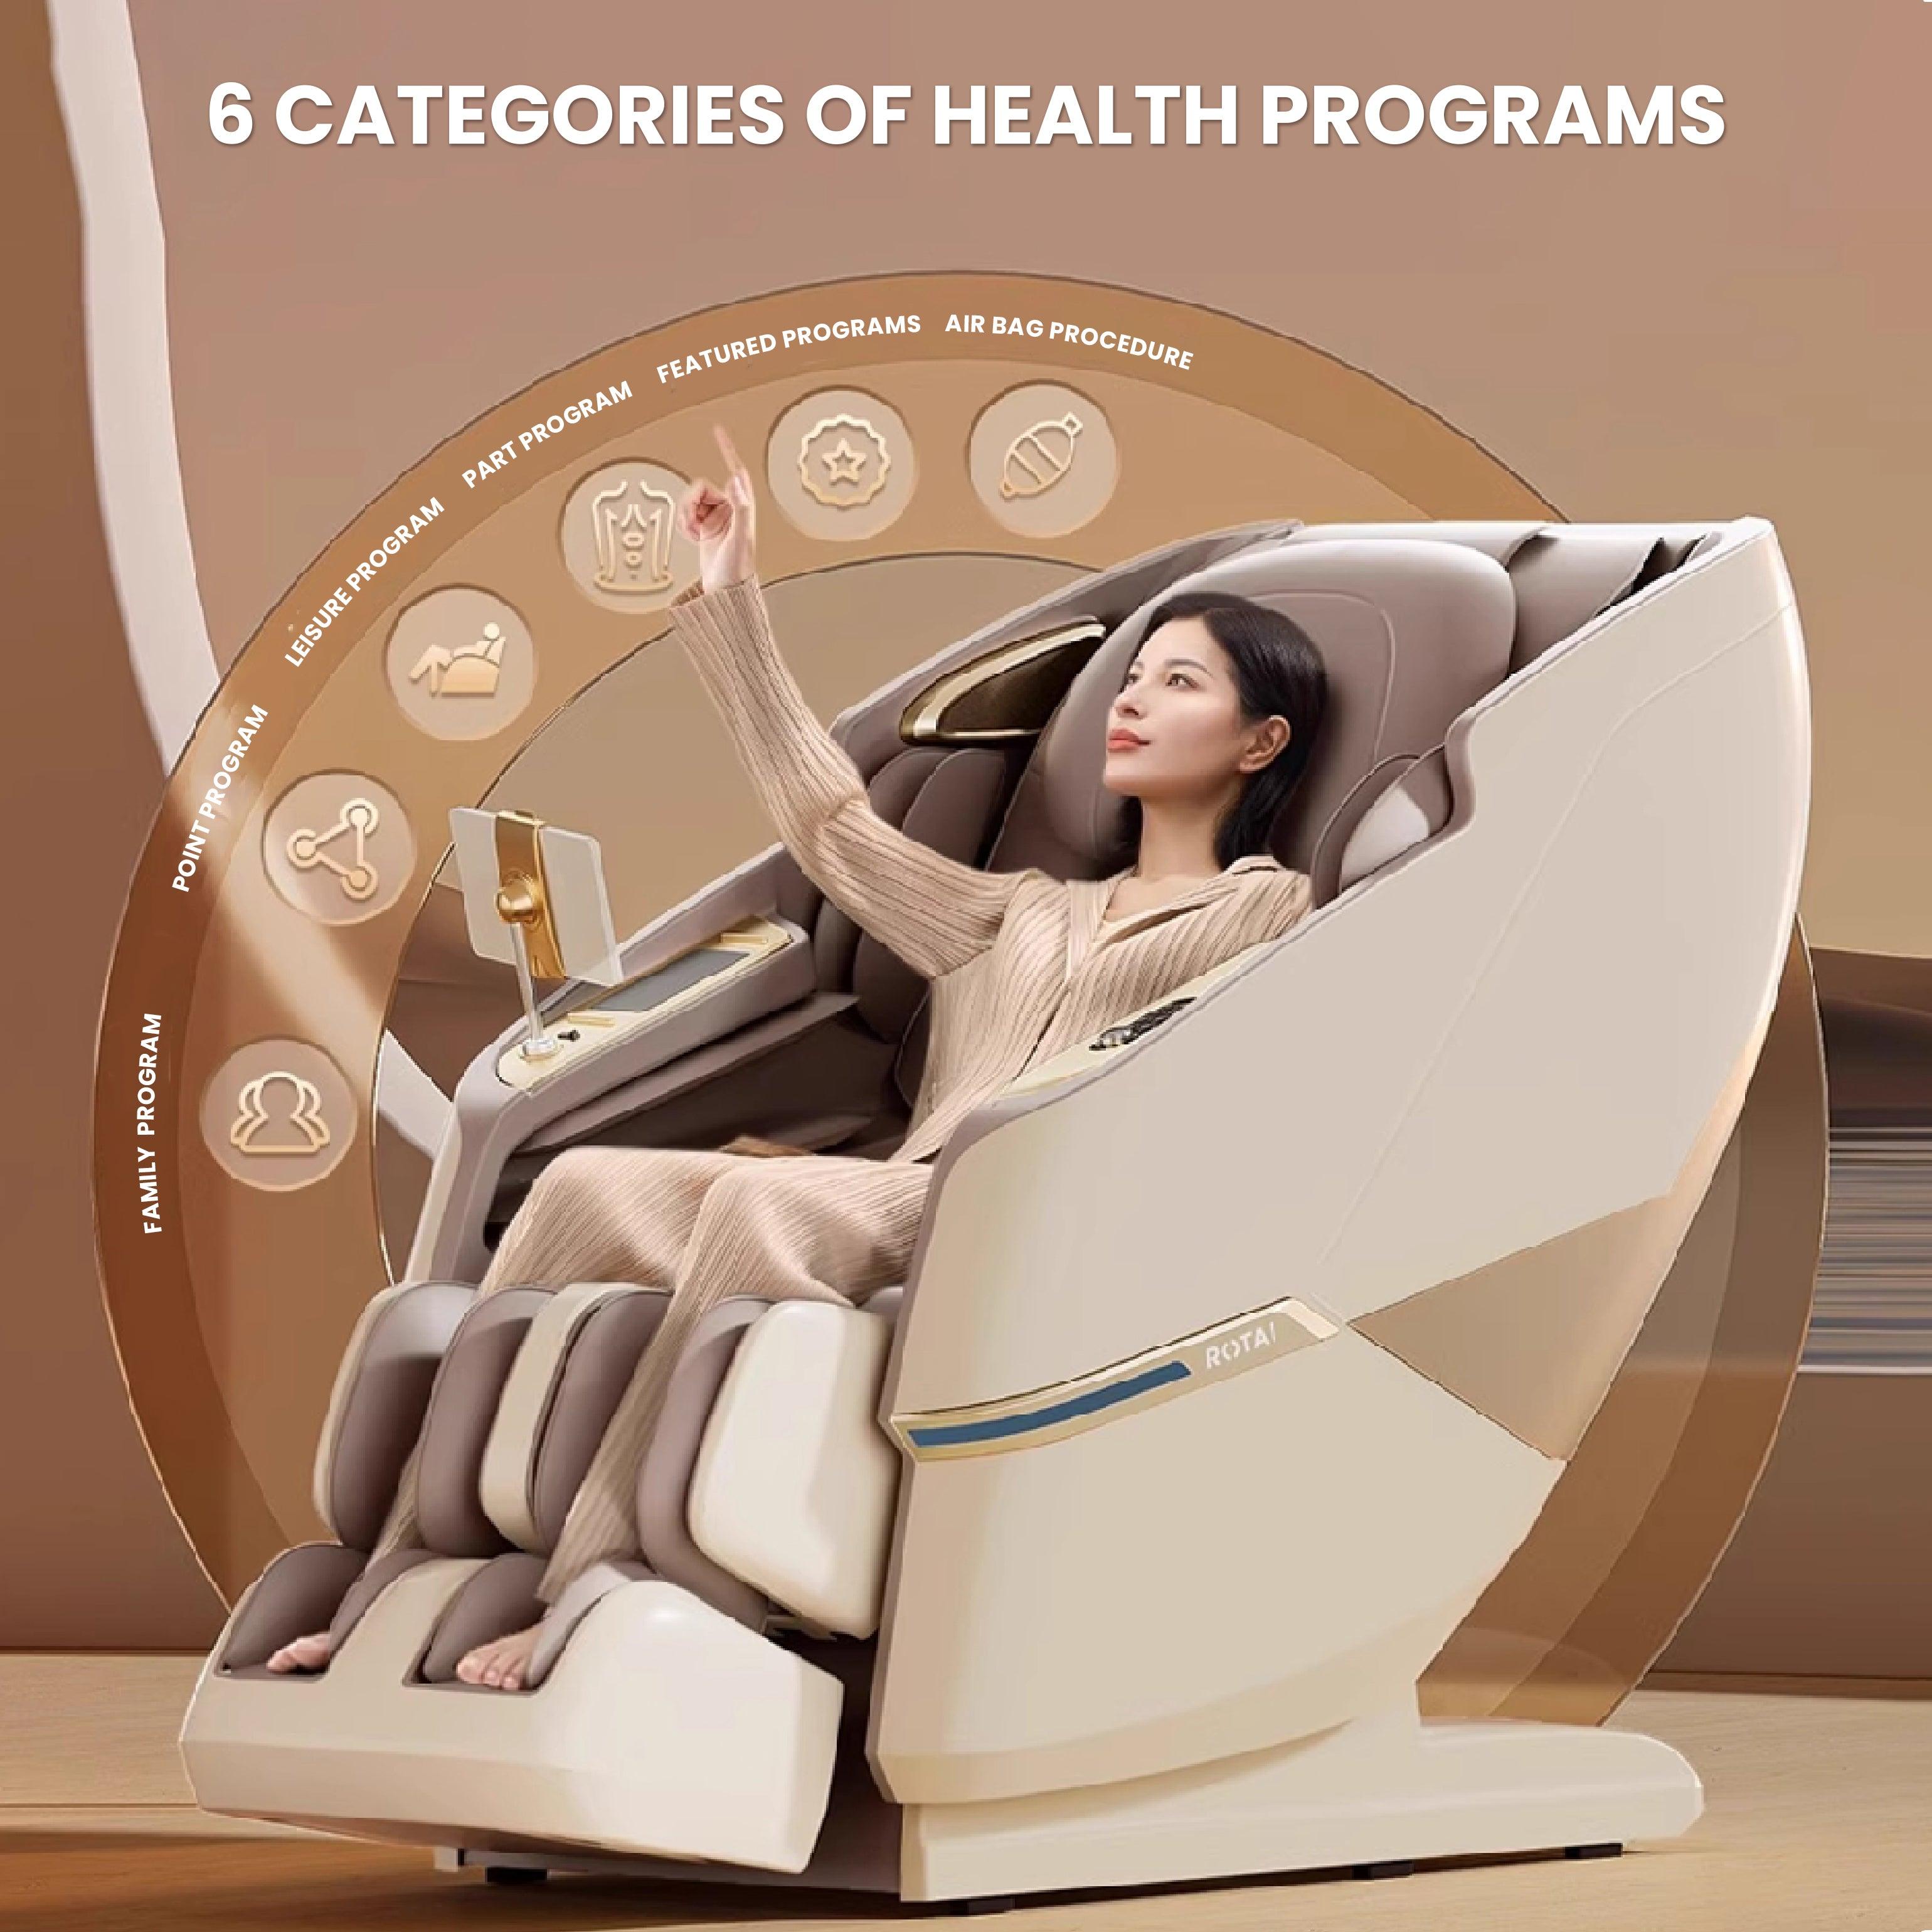 Woman enjoying a relaxing session in the Royal Magestic Pro Massage Chair with 6 health program categories displayed, best massage chair UAE.